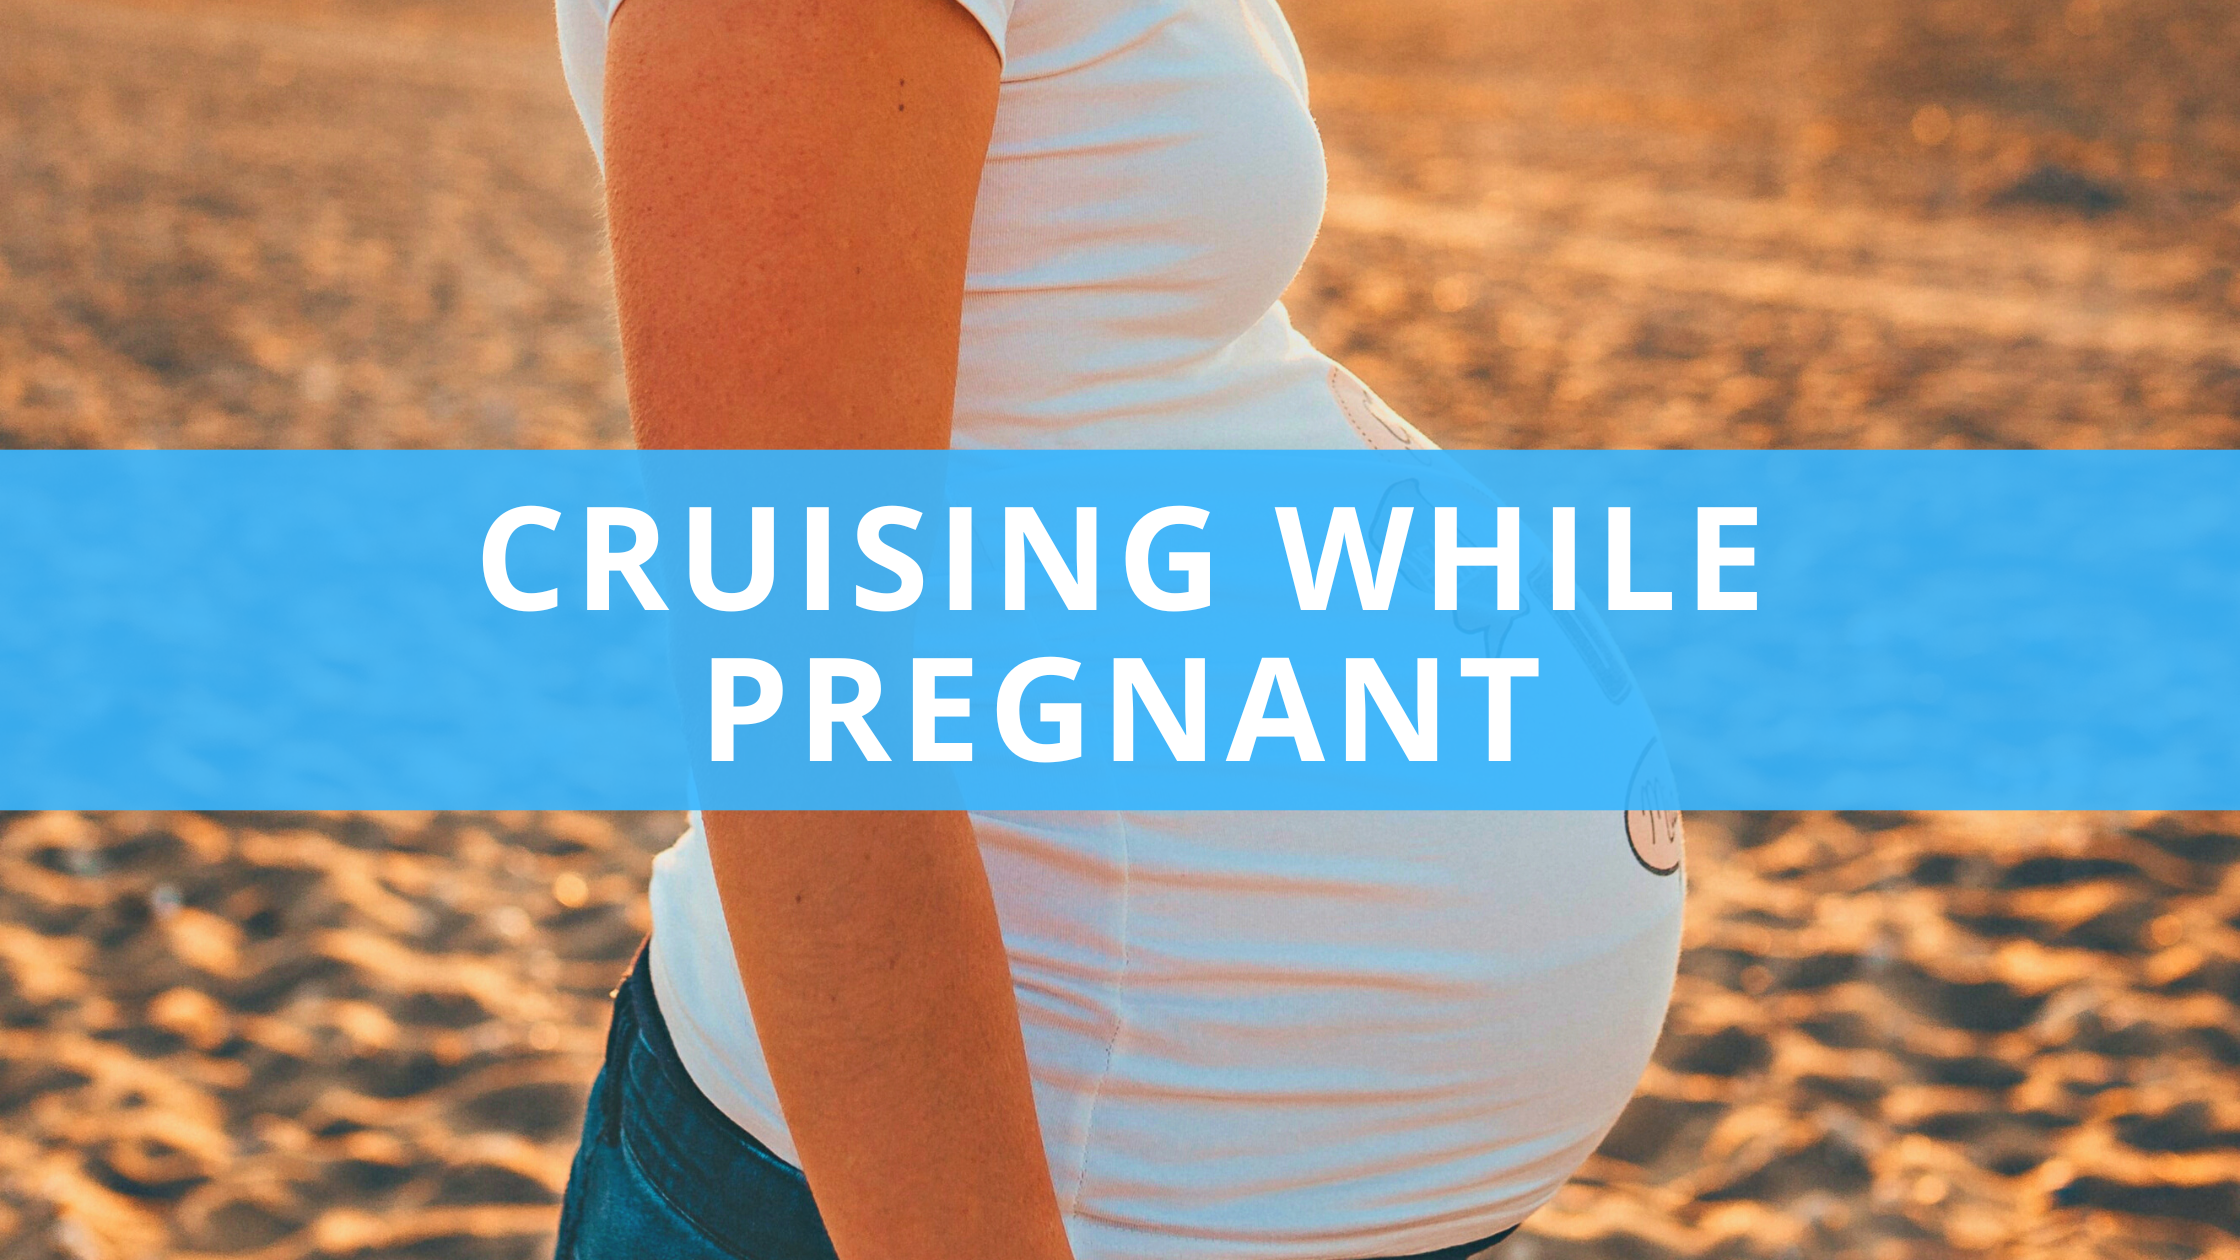 Can You Go on a Cruise Pregnant